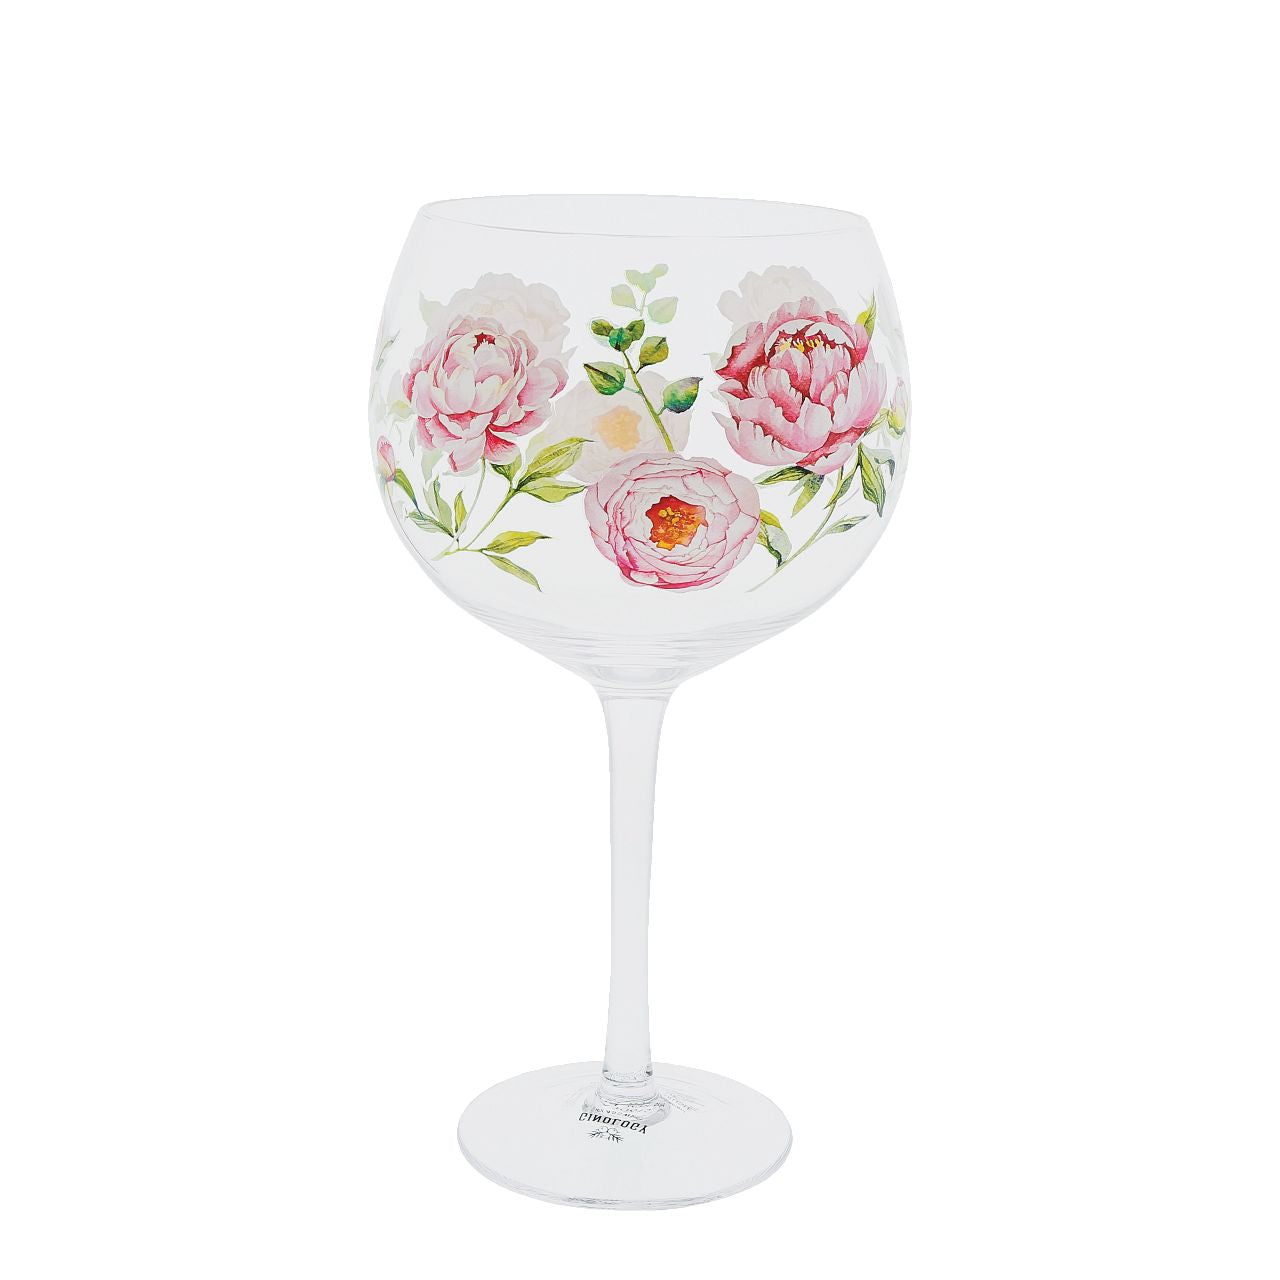 Ginology Peonies Copa Gin Glass  Embody romance, prosperity, good luck and bravey through our Peonies Copa Gin Glass. A glass that can be given to a friend, loved one, graduate or a pick me up gift. It is perfect paired with their favourite bottle of gin.